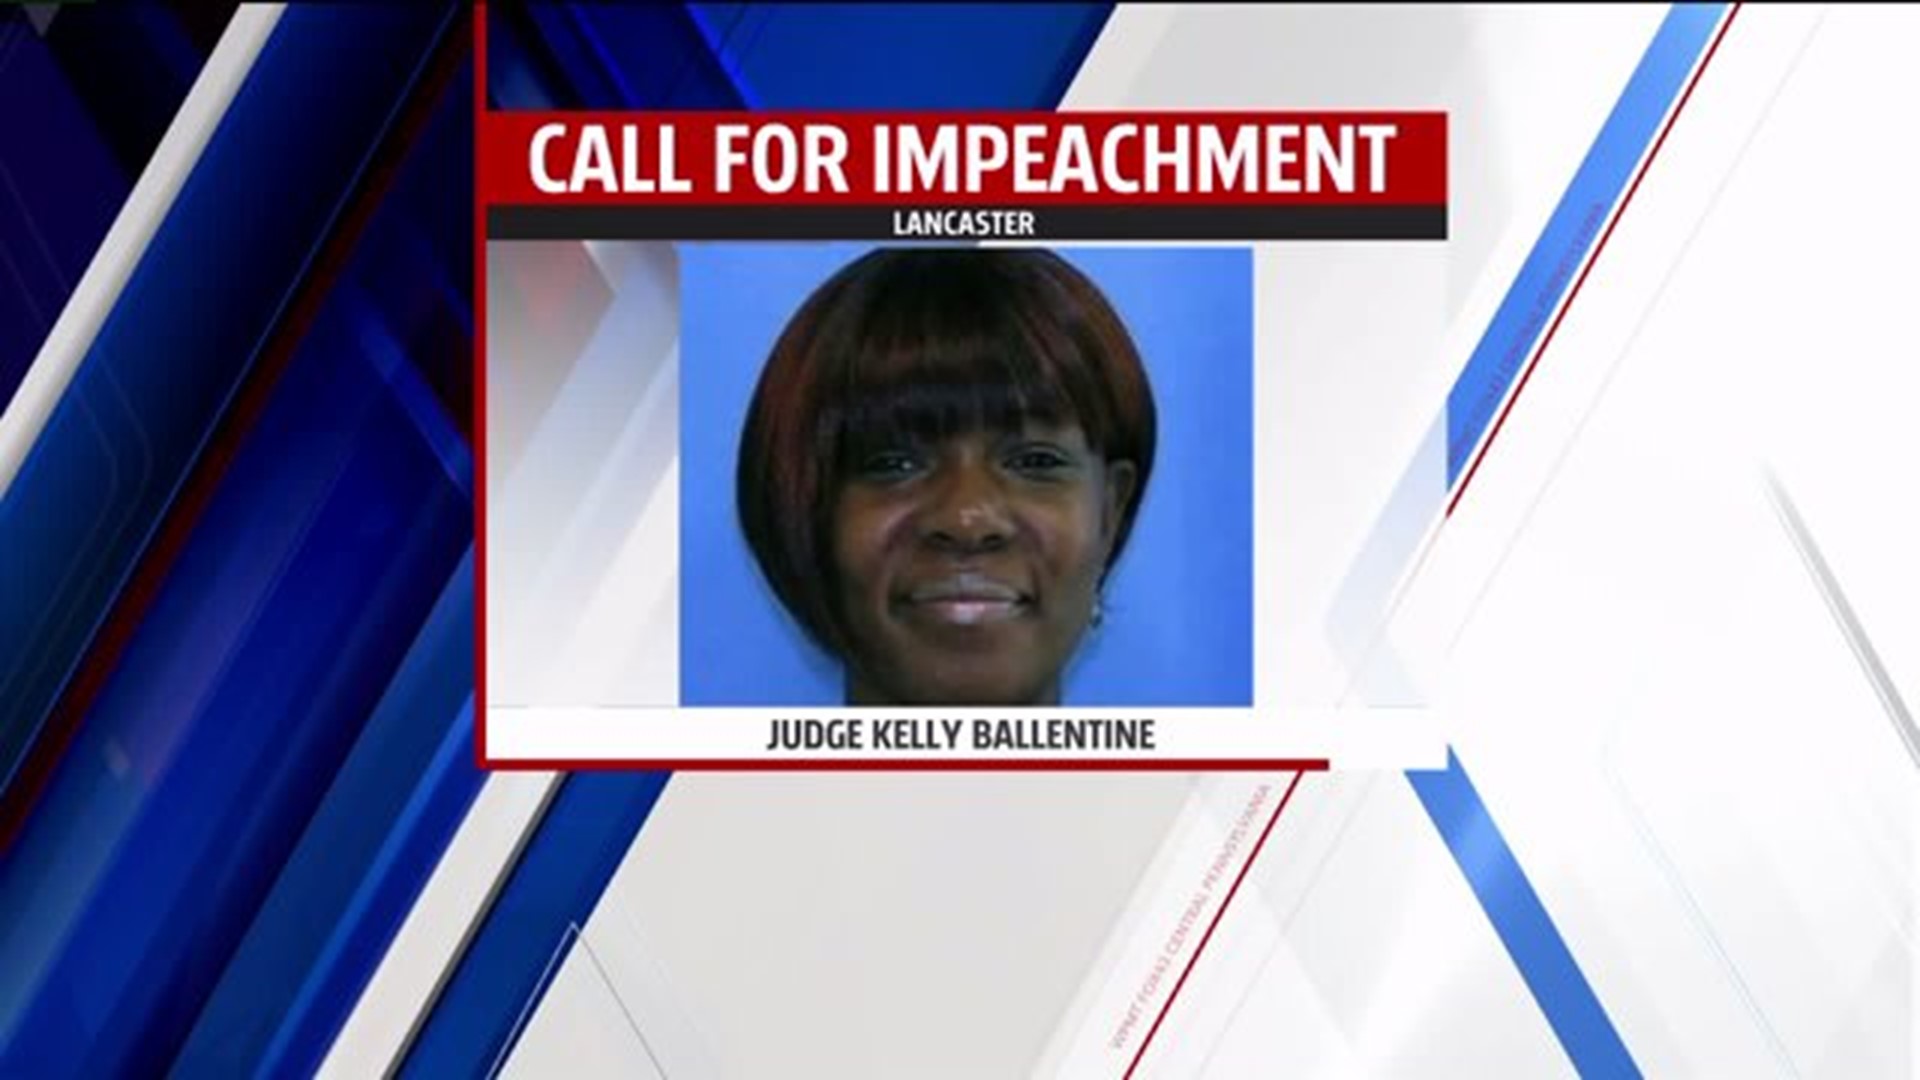 Call for impeachment of Lancaster City judge